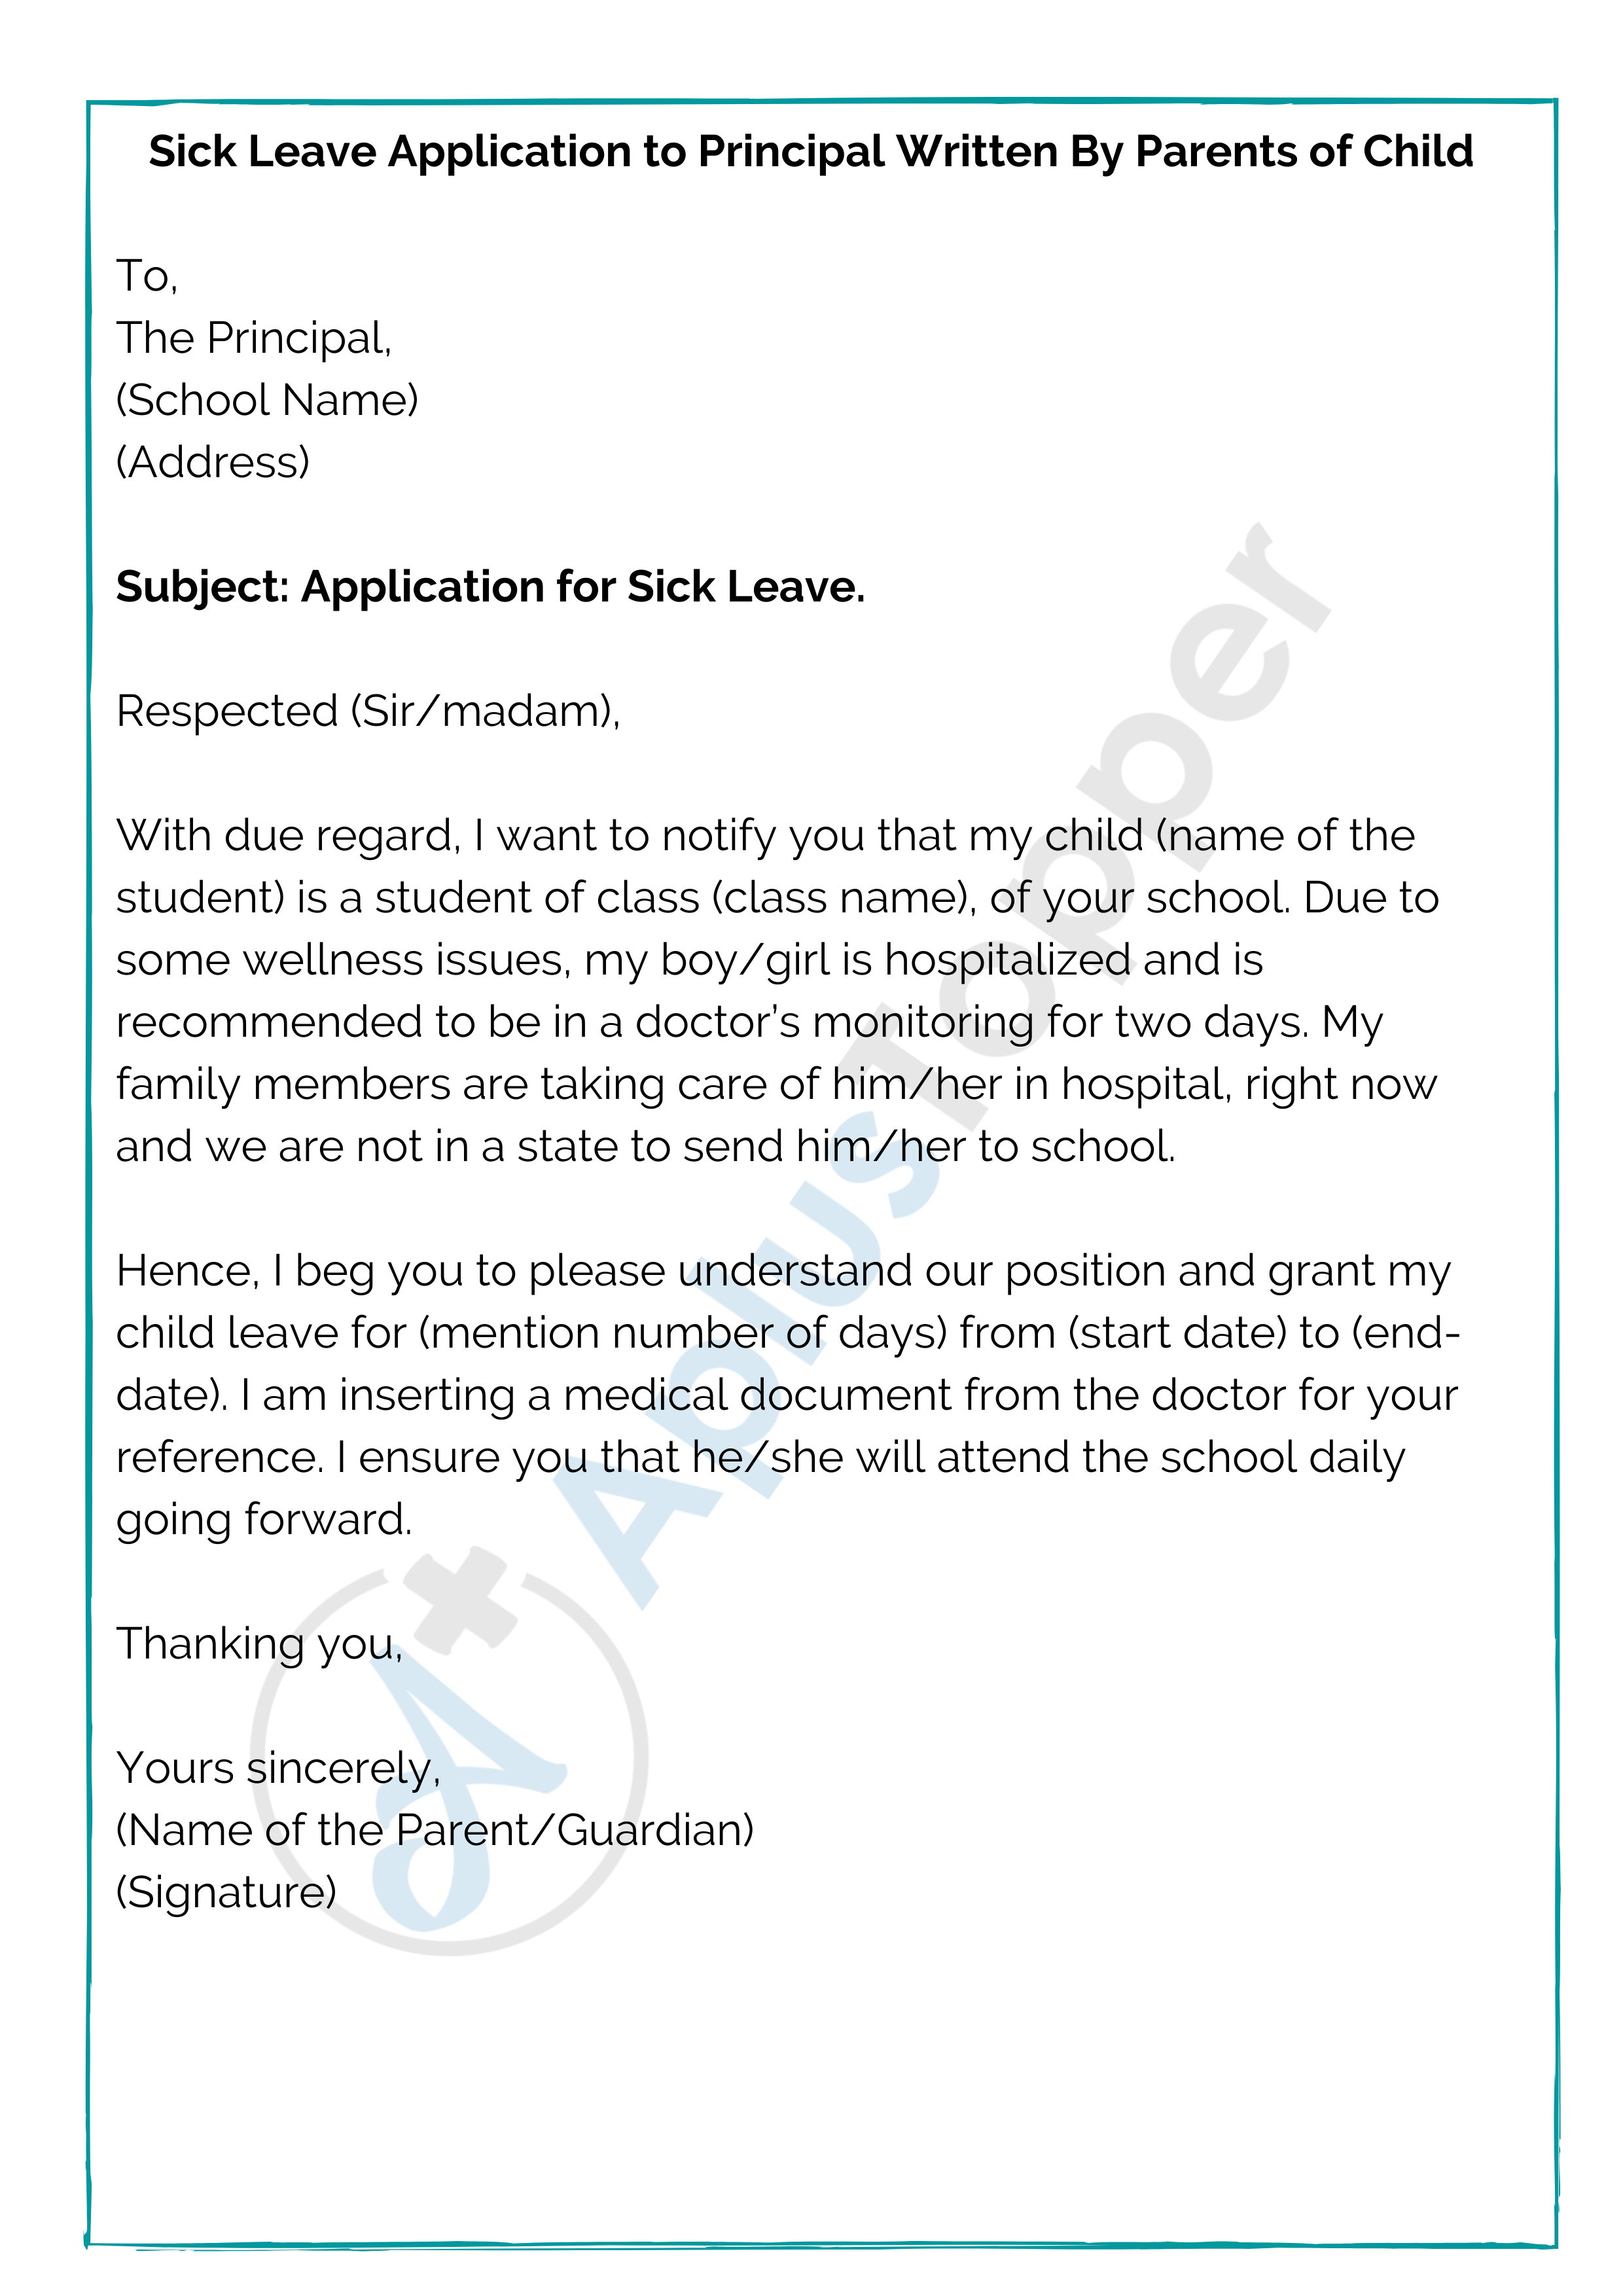 Sick Leave Application to Principal Written By Parents of Child